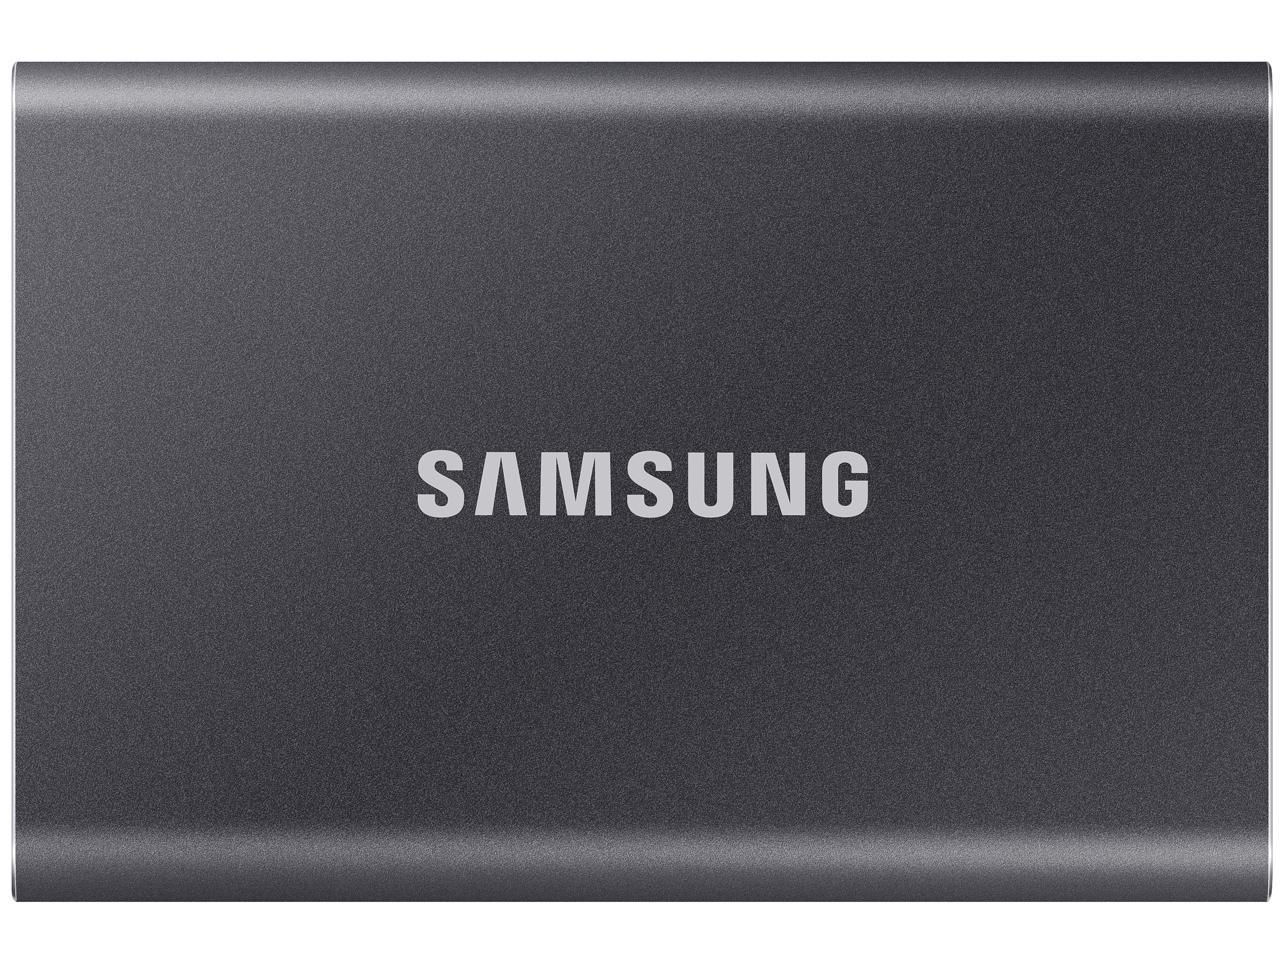 SAMSUNG T7 Portable SSD 1TB - Up to 1050 MB/s - USB 3.2 External Solid State Drive, Gray (MU-PC1T0T/AM)